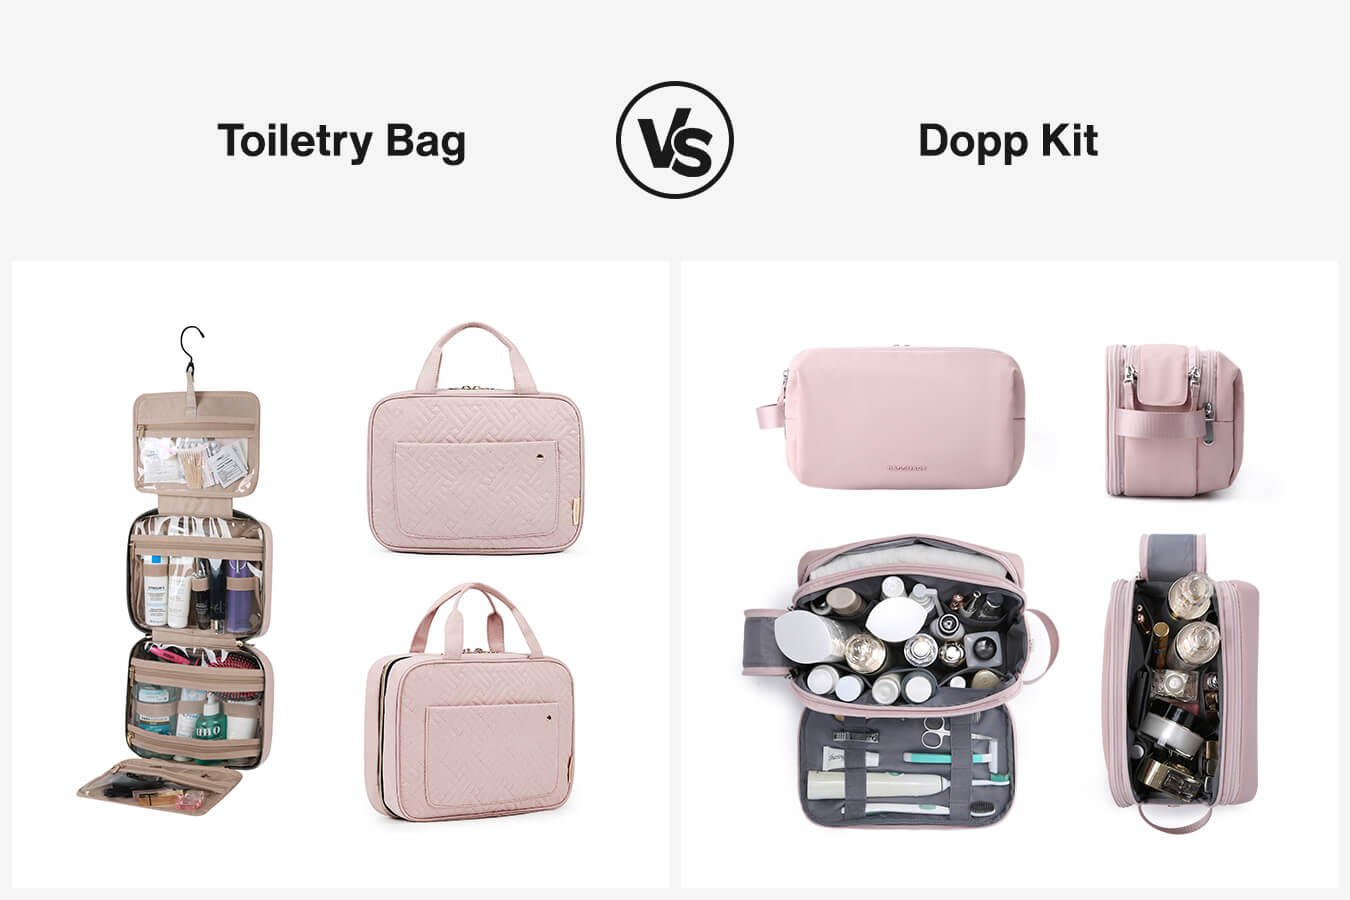 Help you determine if a toiletry bag or dopp kit better suits your needs